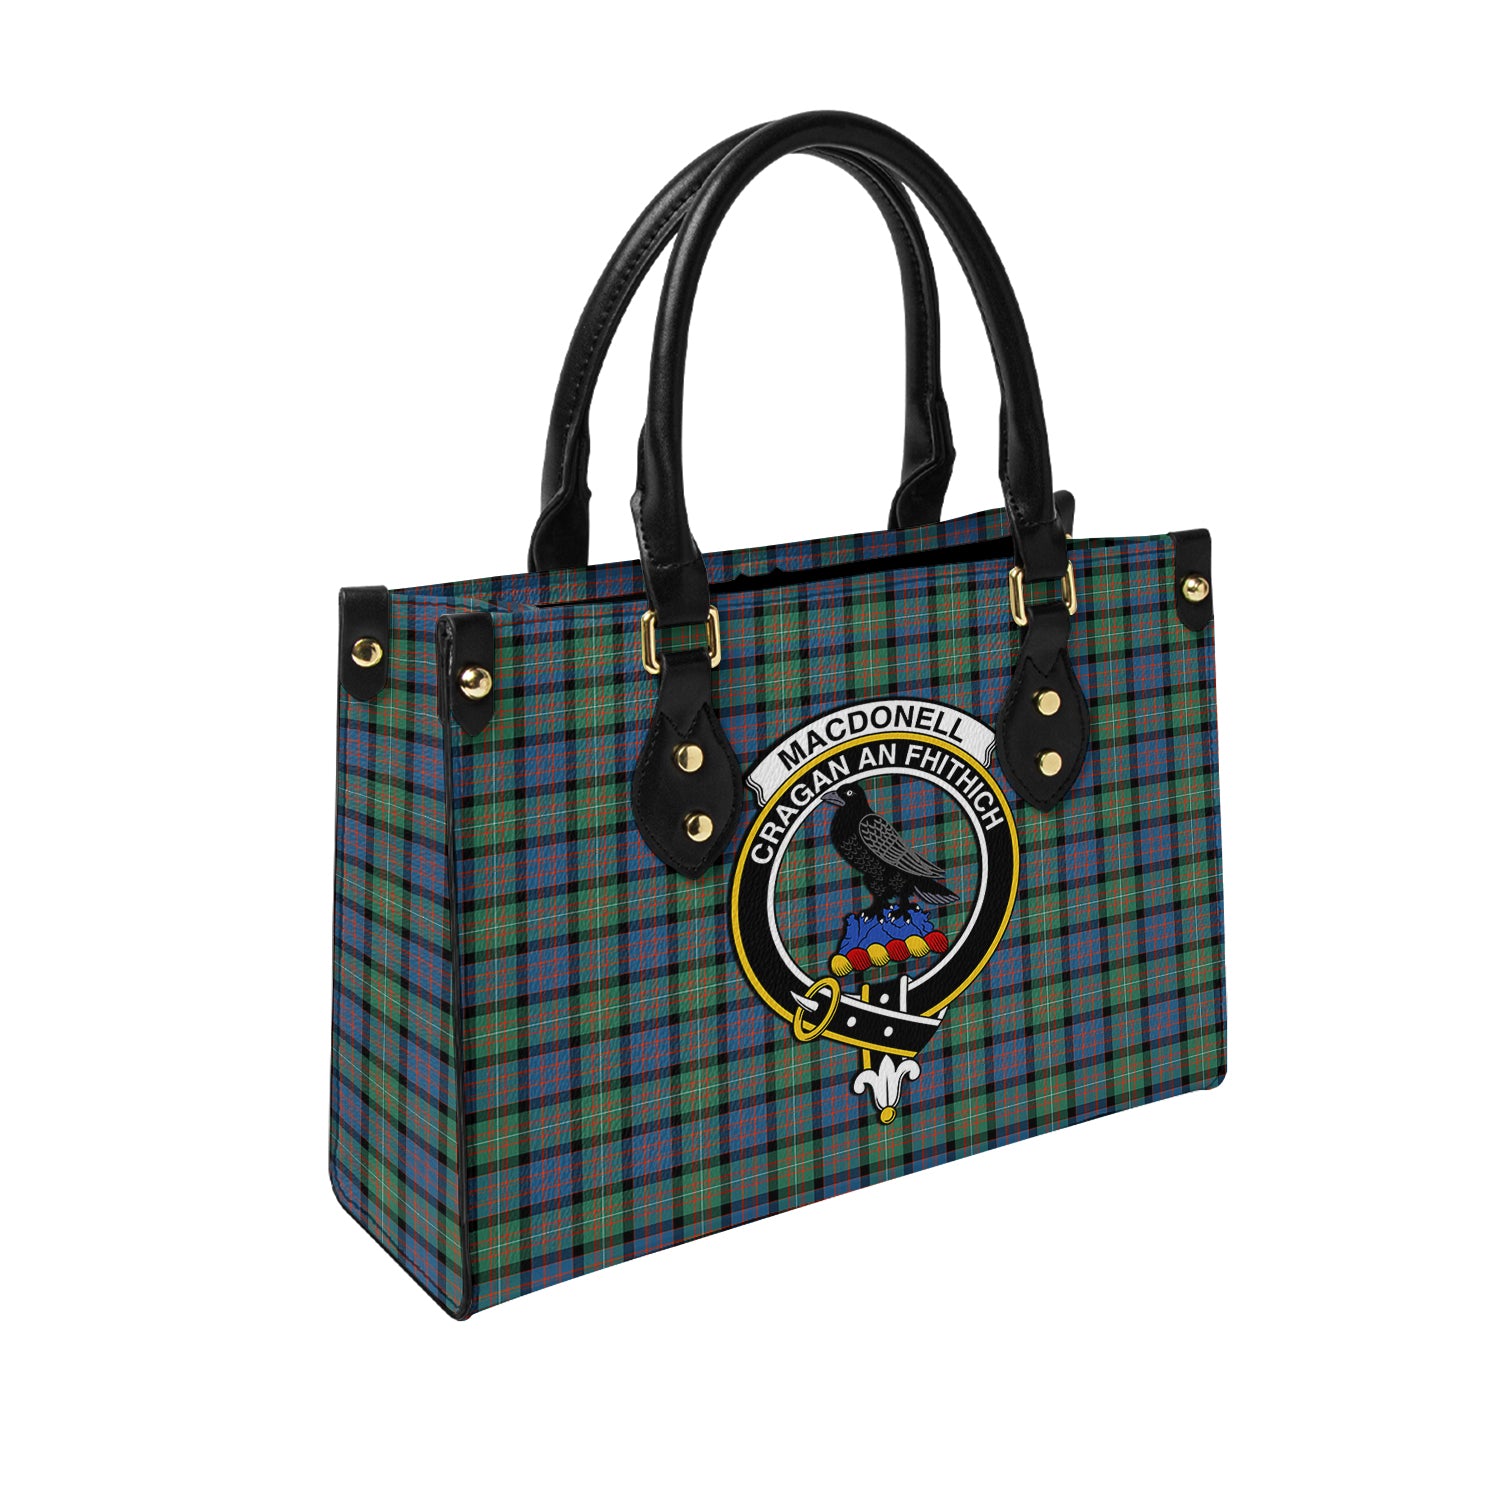 macdonell-of-glengarry-ancient-tartan-leather-bag-with-family-crest